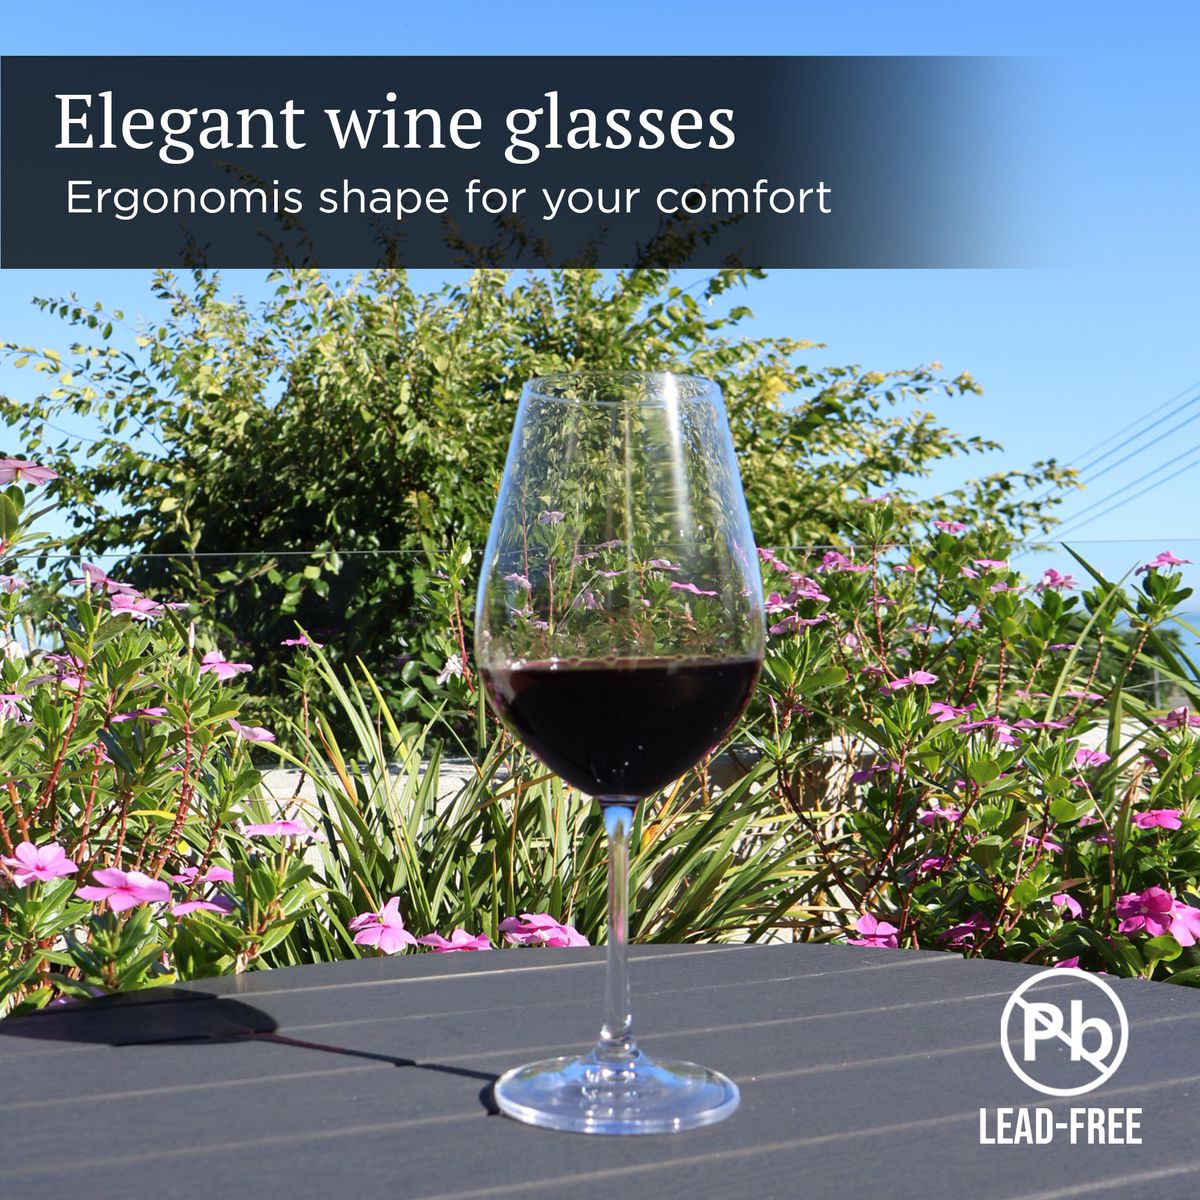 Red Wine Glasses - 690ml - 4 Pieces - Lead-Free Crystalline